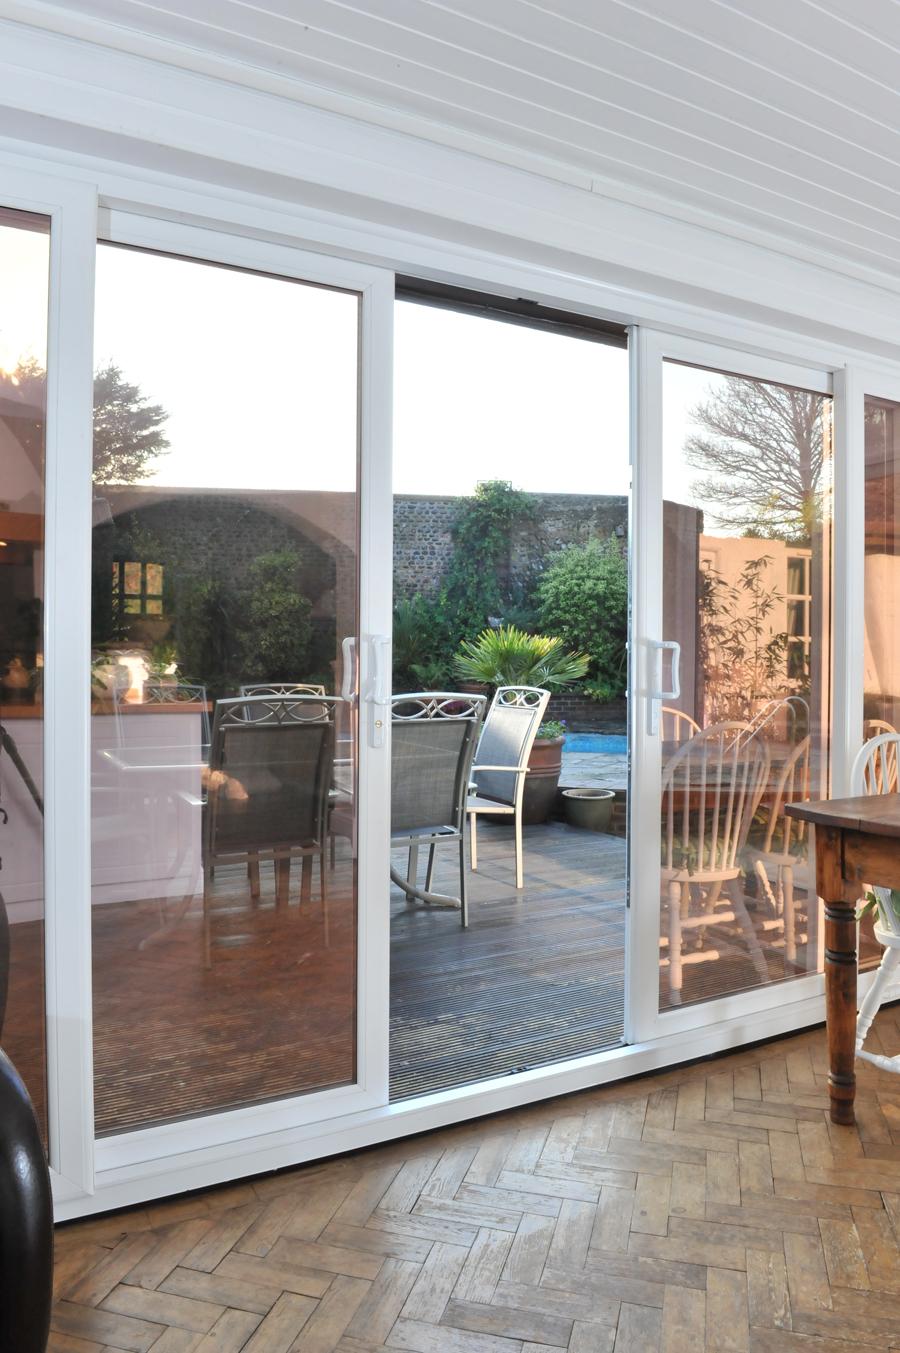 White Liniar patio door opened onto a wooden decked area